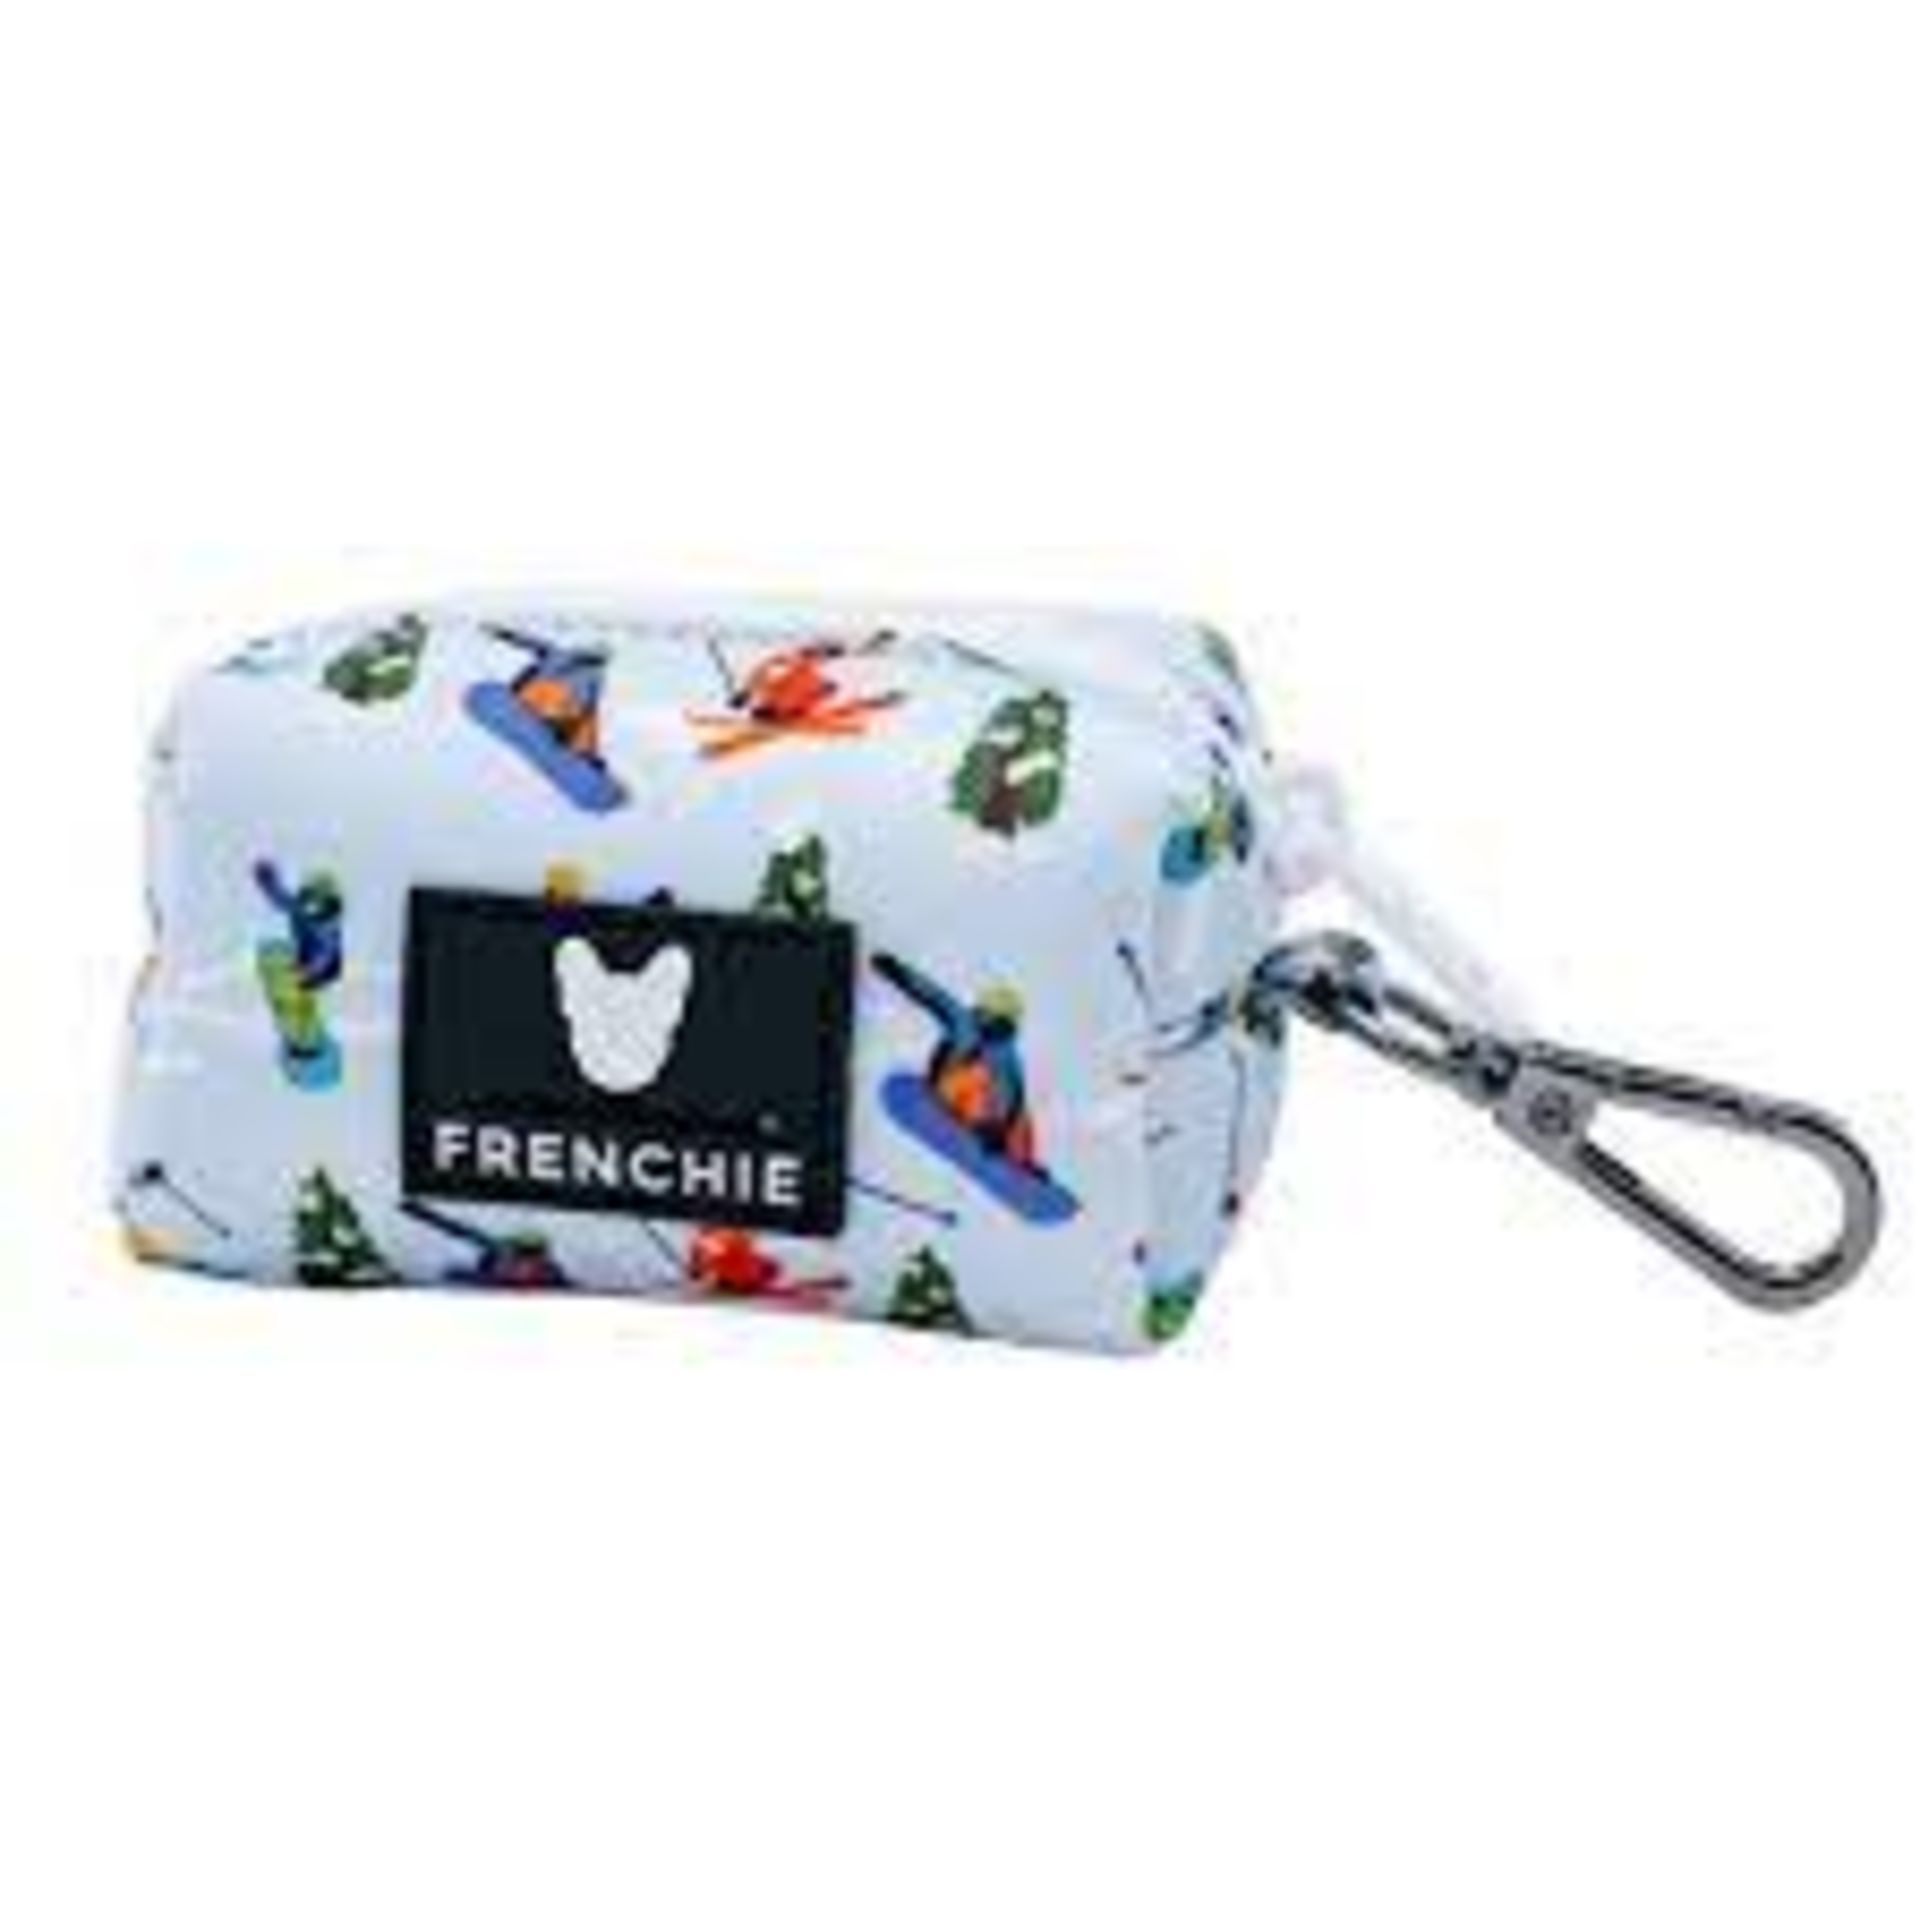 Bulk Trade Lot 500 X New .Packaged Frenchie The Bulldog Luxury Branded Dog Products. May include - Image 24 of 50